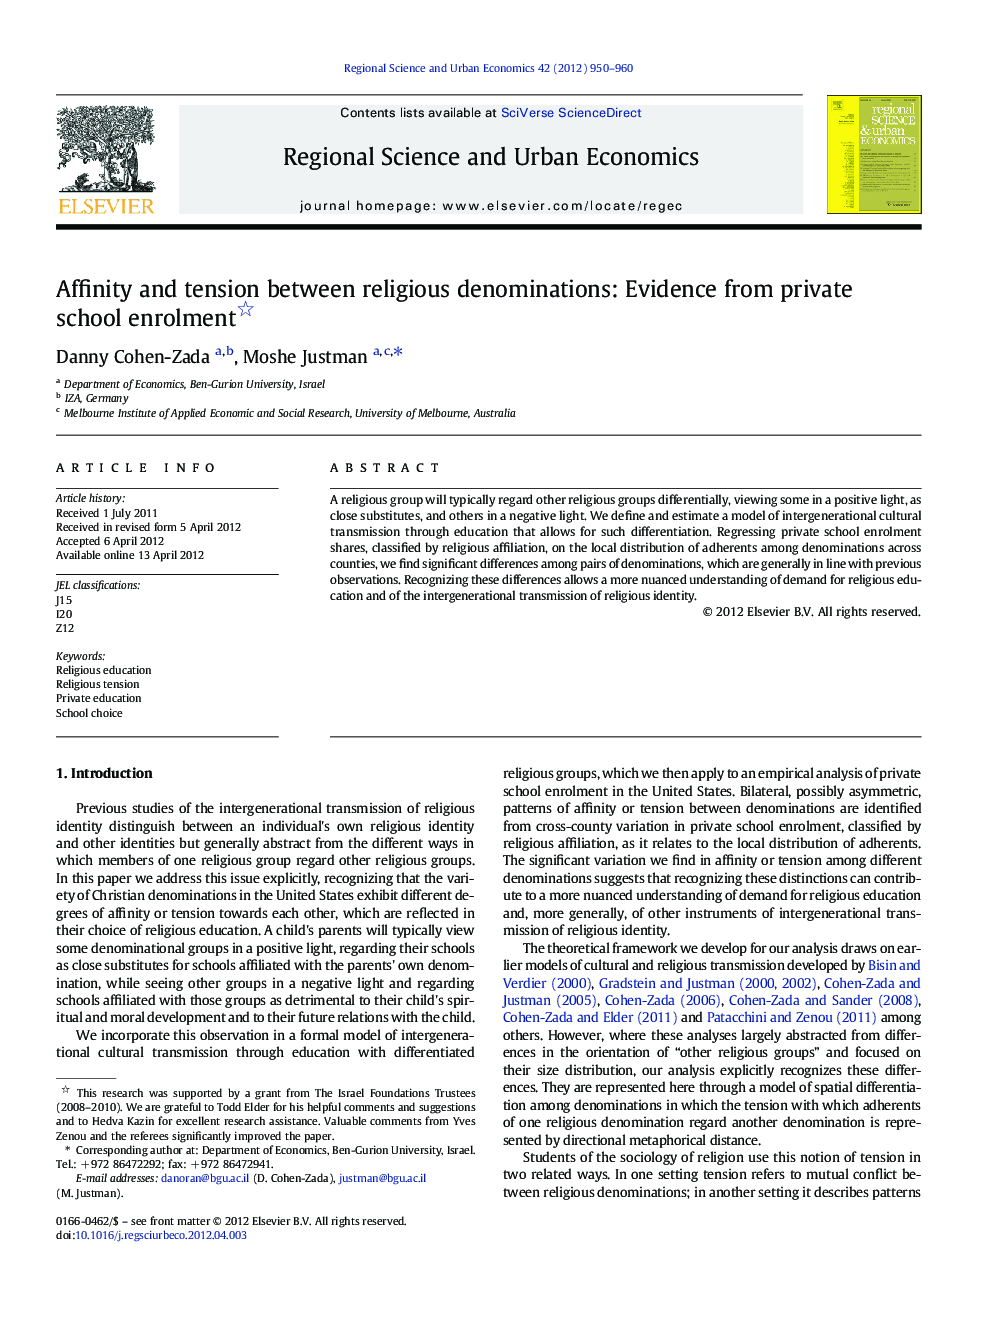 Affinity and tension between religious denominations: Evidence from private school enrolment 